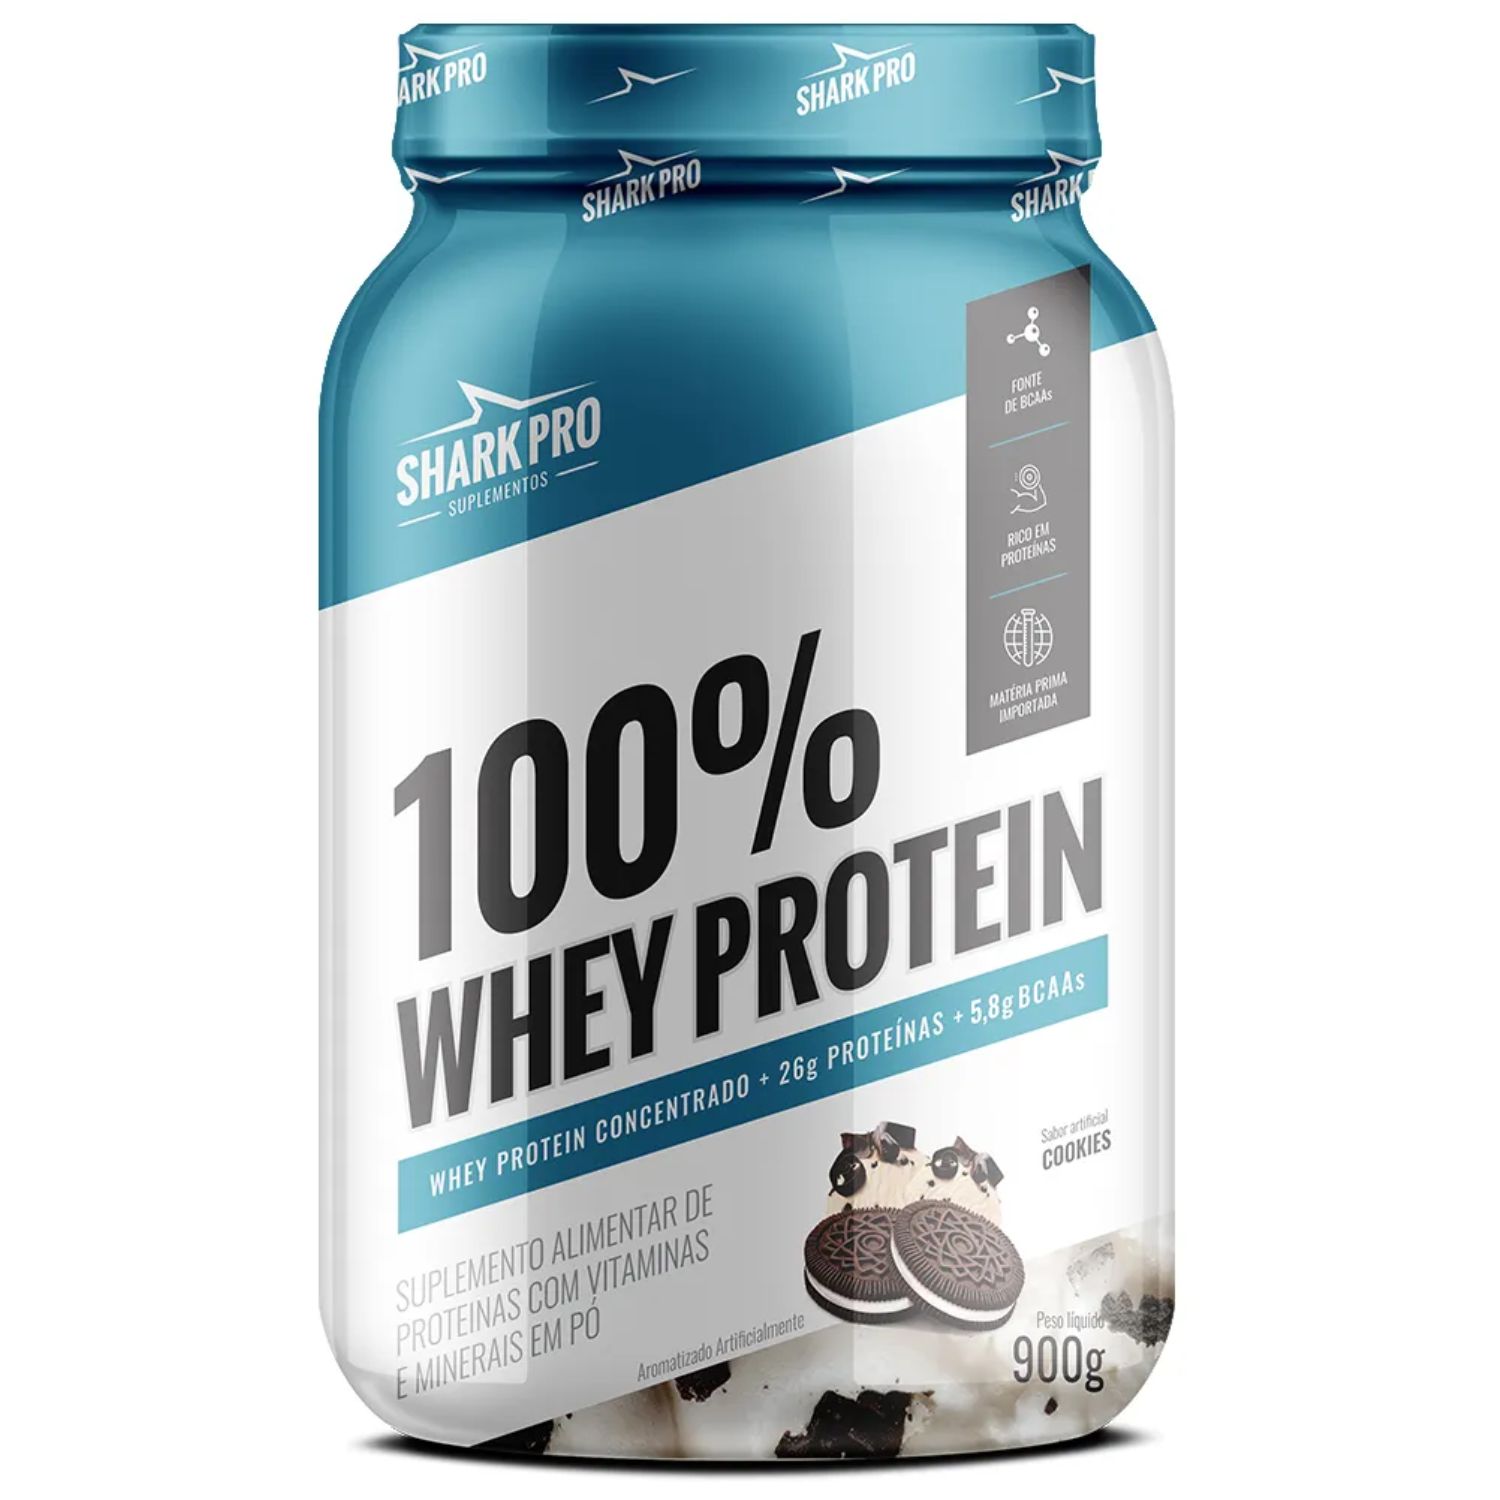 100% WHEY PROTEIN POTE 900G SHARK PRO - COOKIES